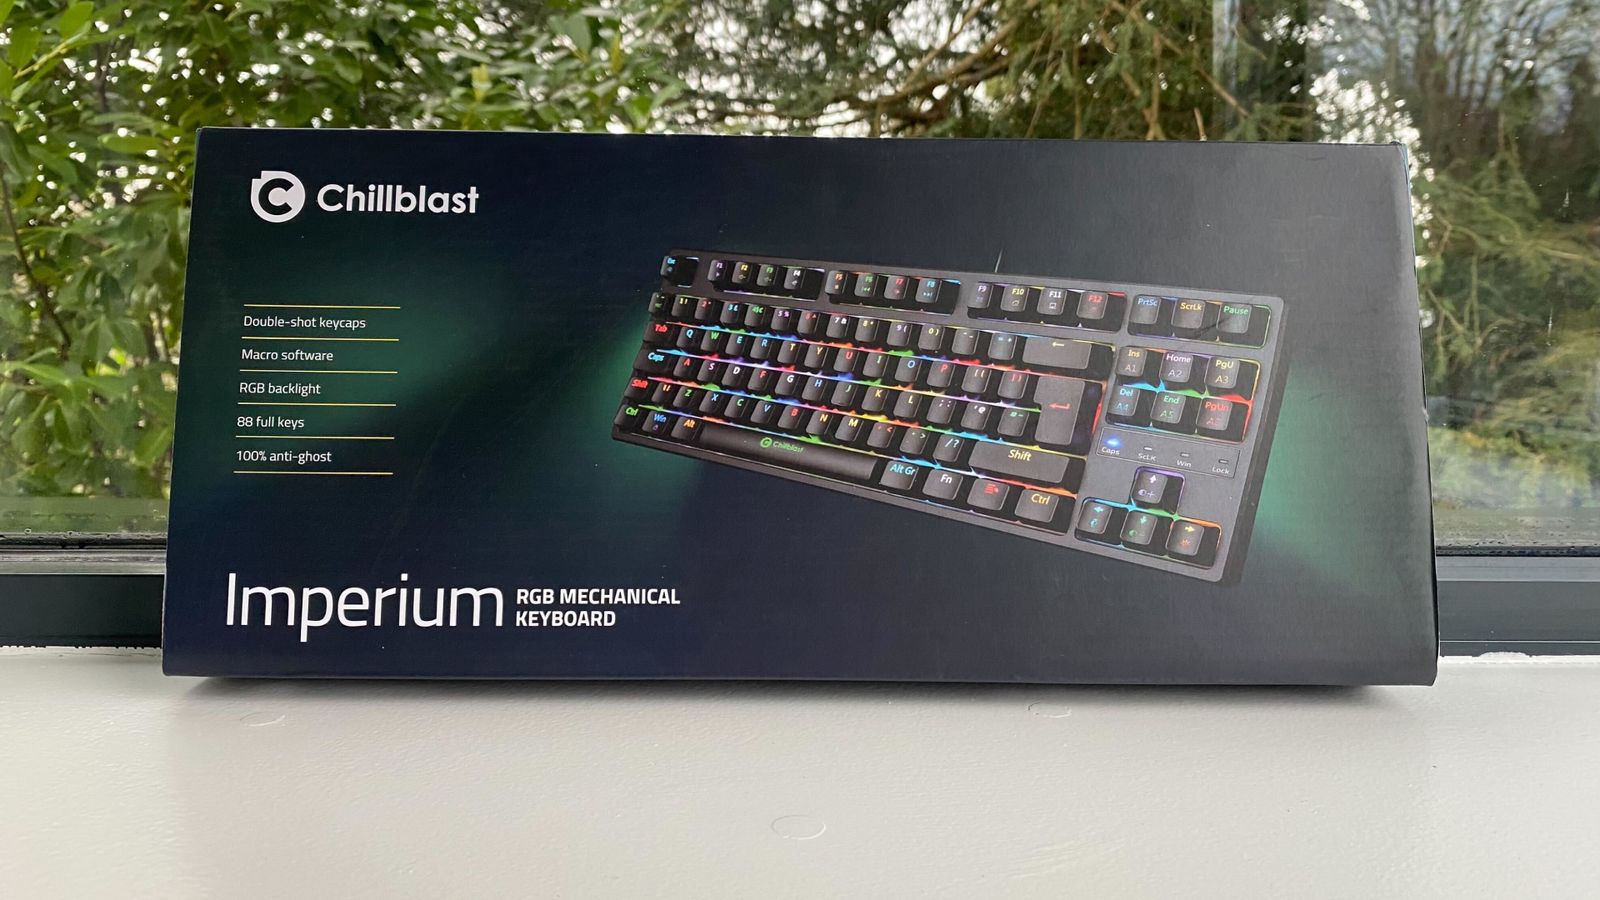 Image of the dark green and blue box for the Chillblast Imperium keyboard.